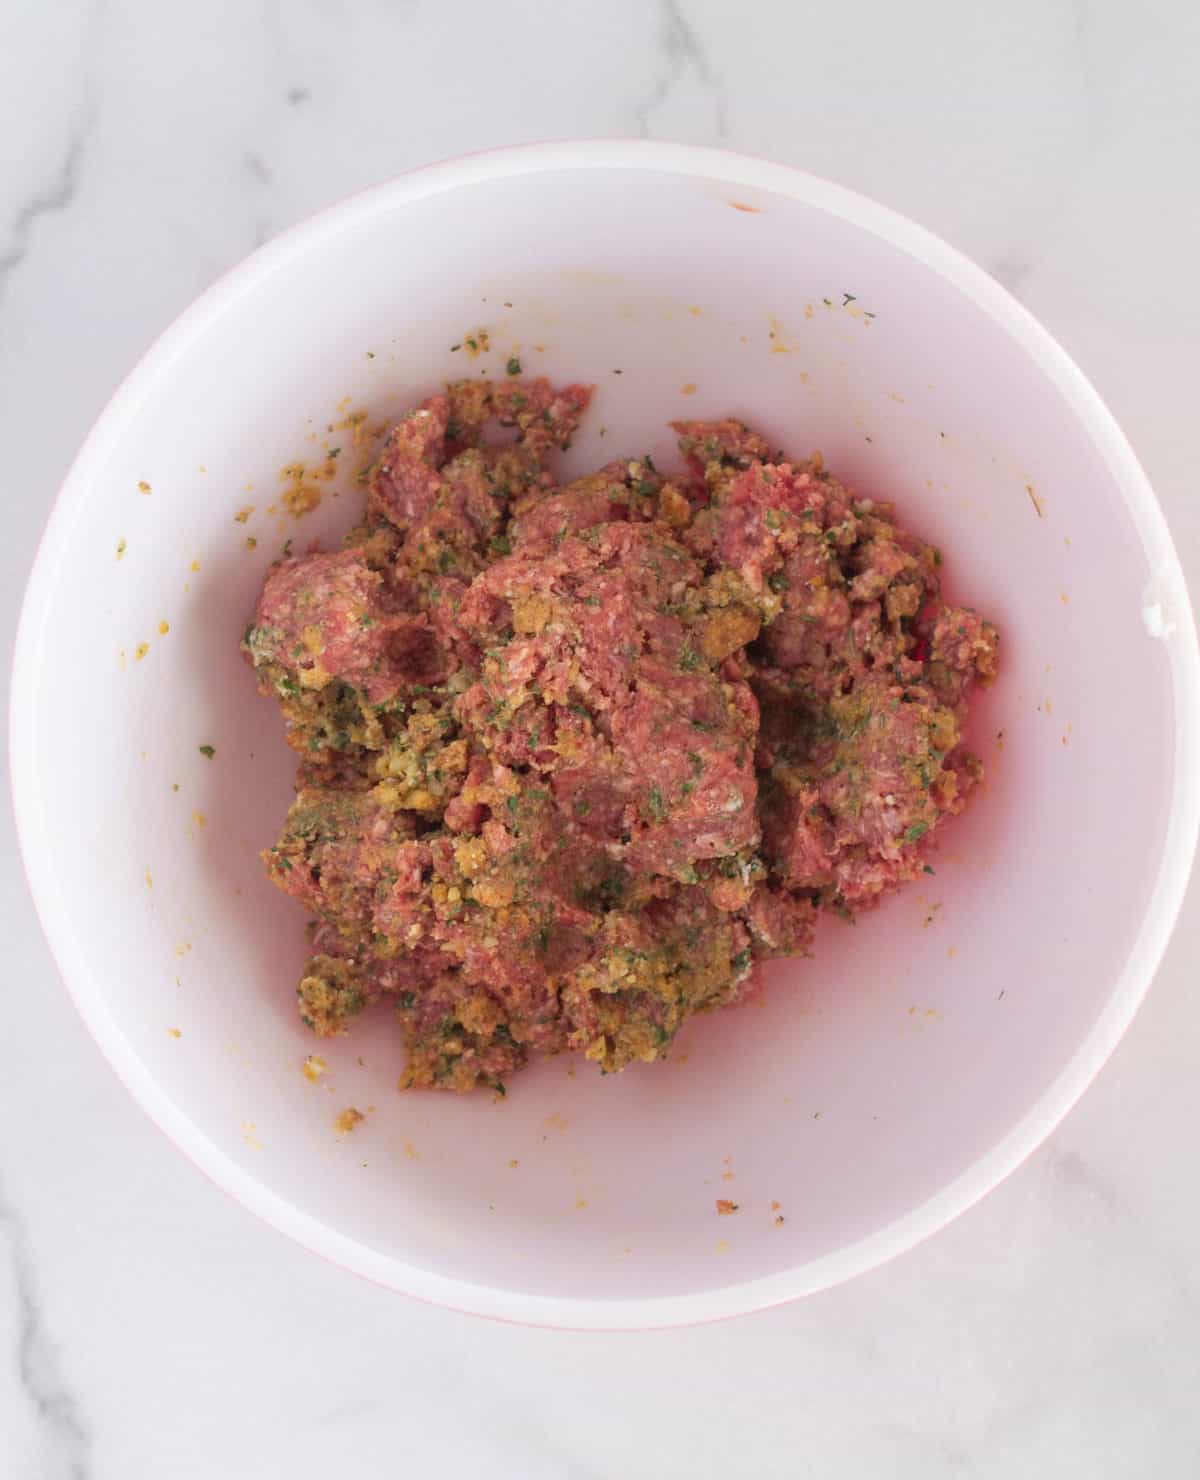 mixed meatball ingredients in mixing bowl